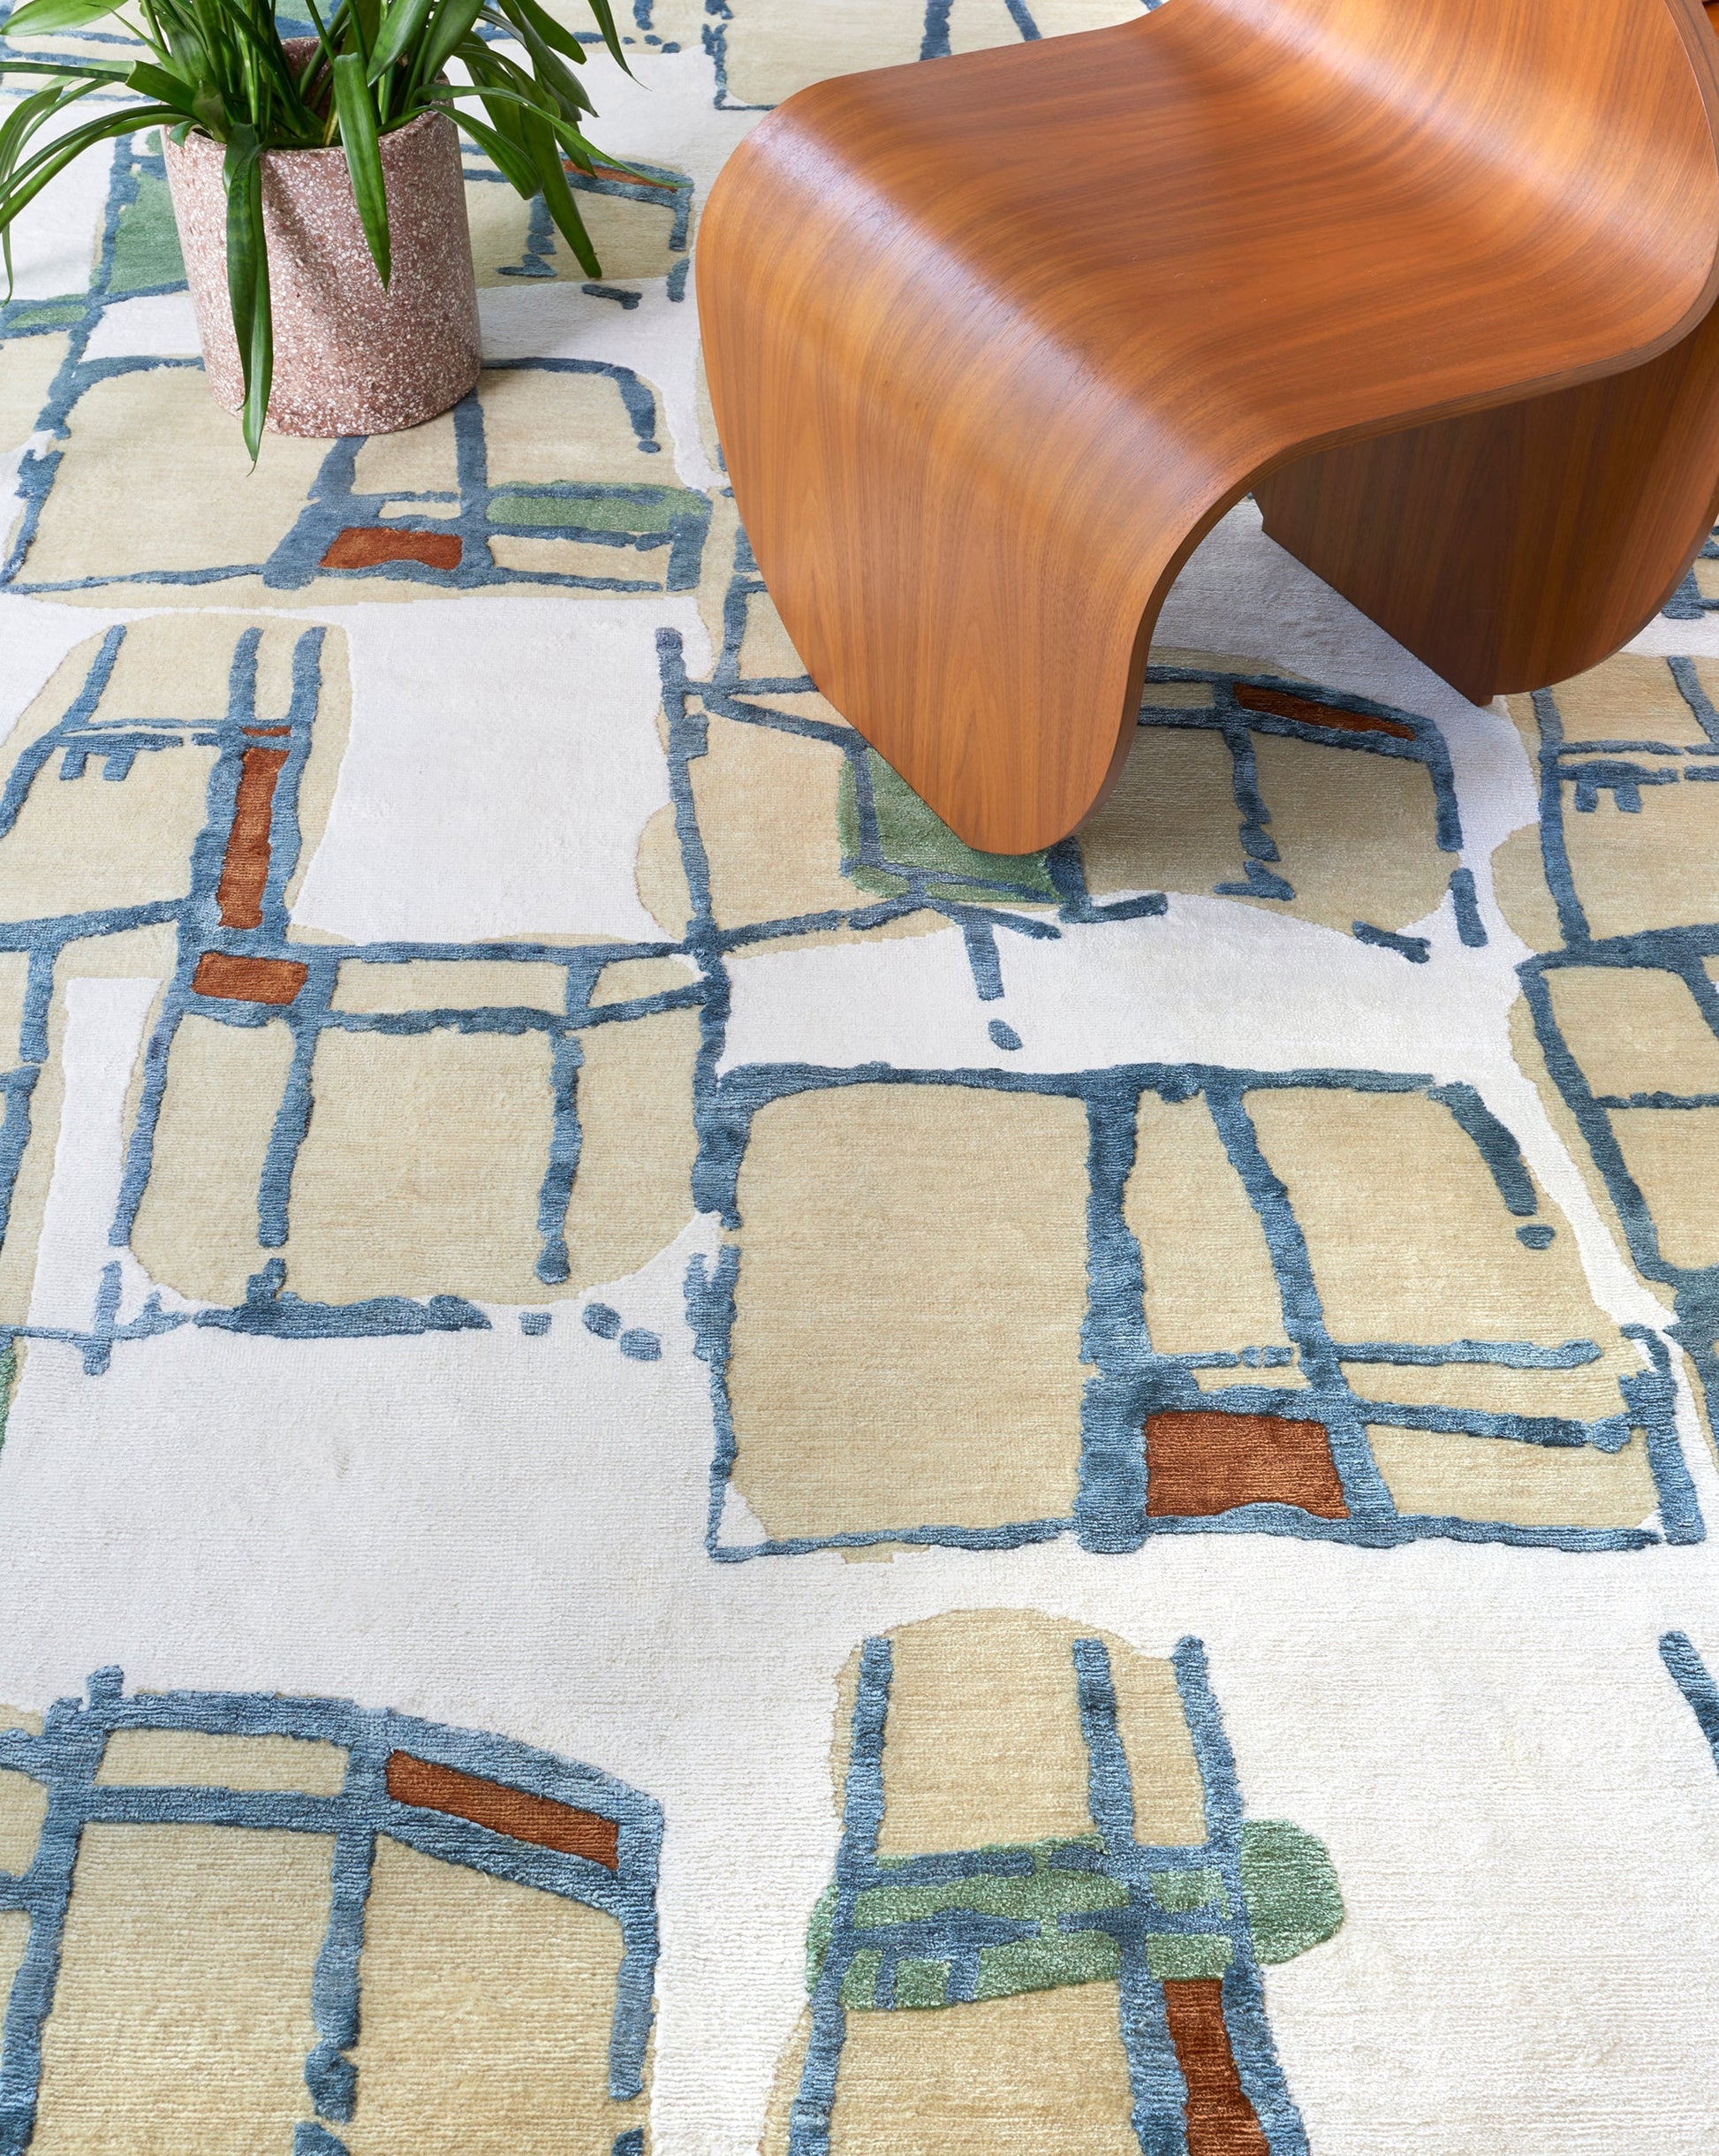 A modern Quotidiana Hand Knotted Rug 6' x 9' Isthmus with a wooden chair and a potted plant undergoes the Eskayel design process